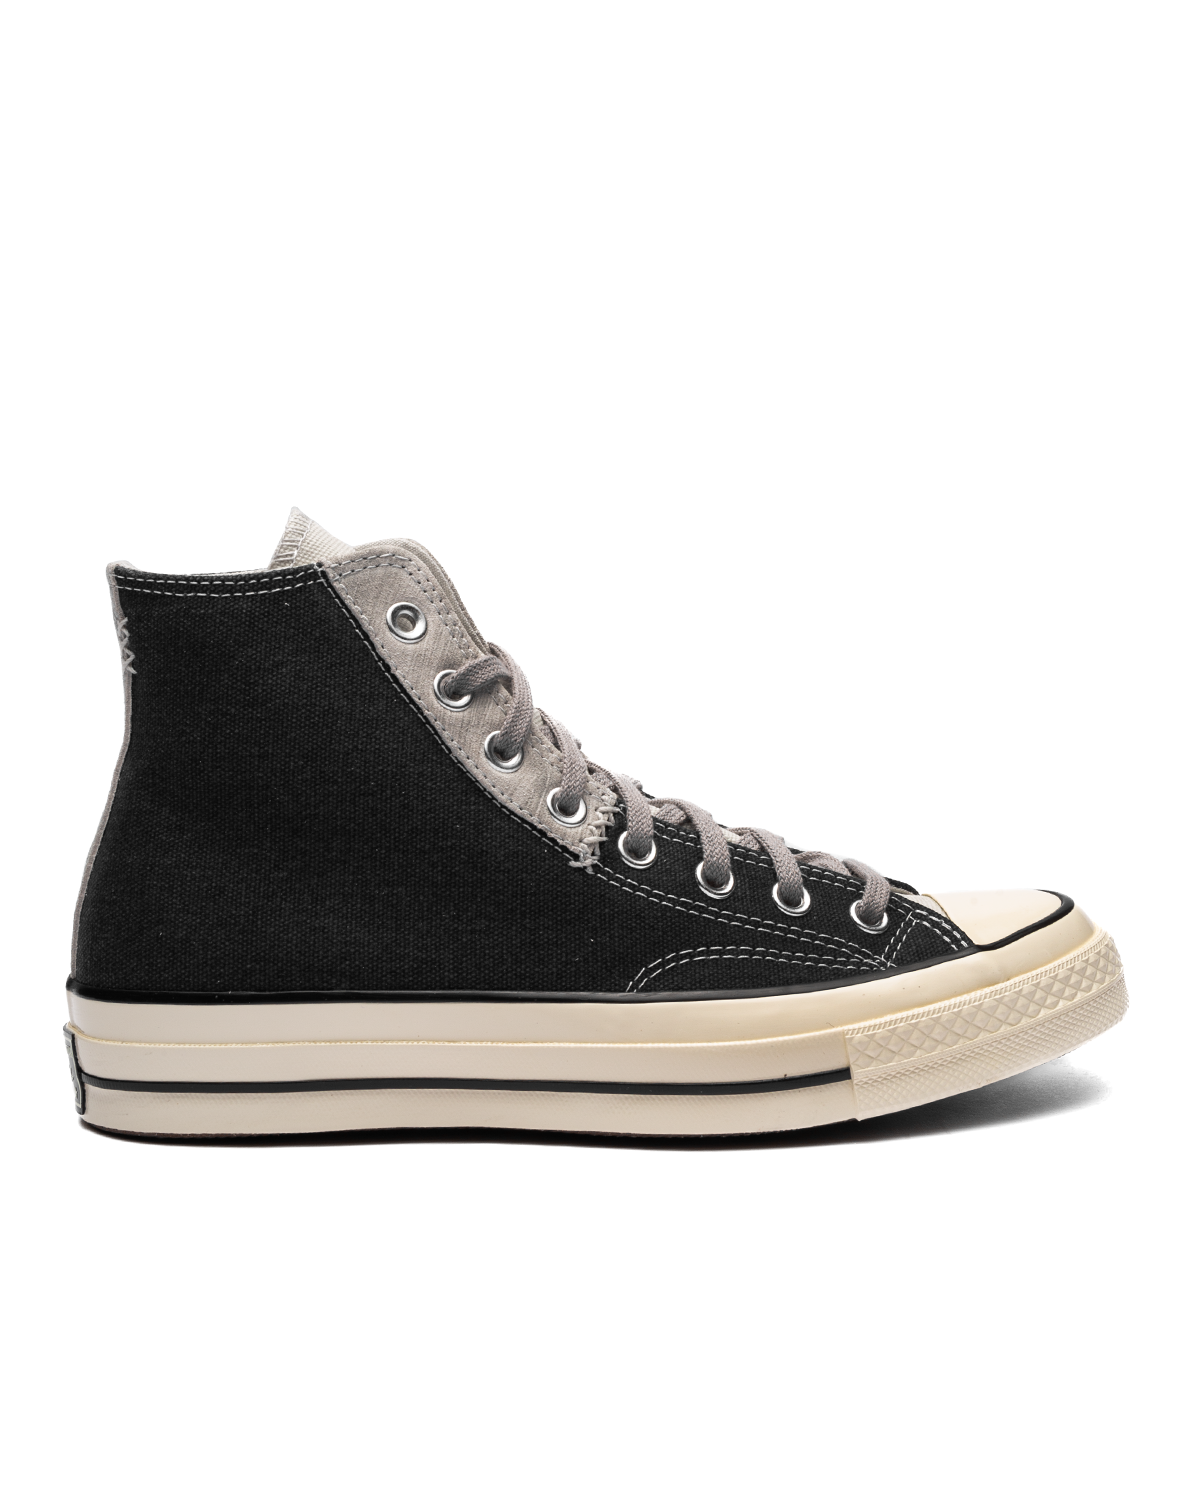 Chuck 70 High Mixed Materials Black/Fossilized/Total Neutral